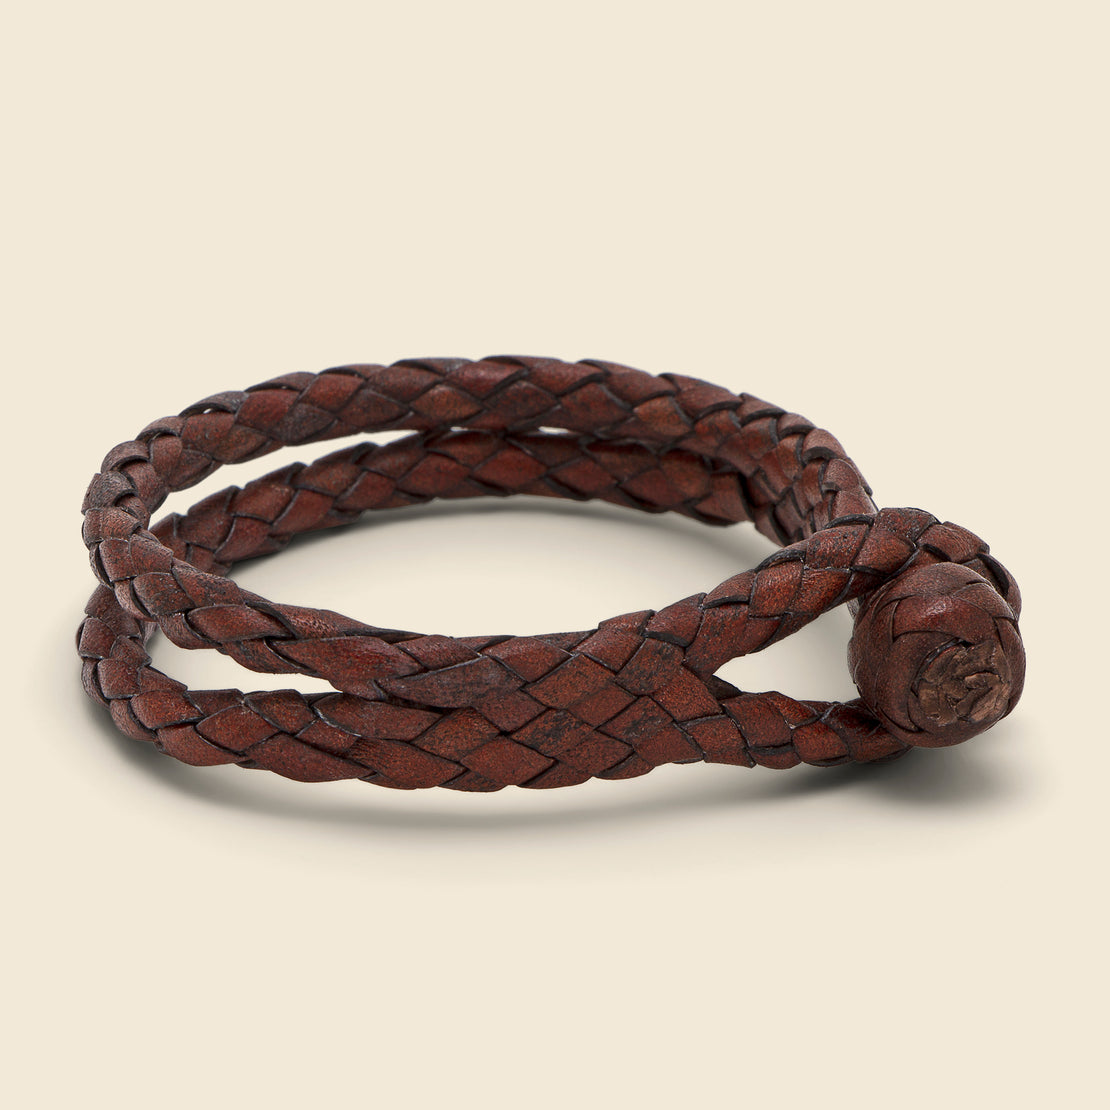 Double Wrap Mountain Cuff, Thick Leather Bracelet Dark Brown